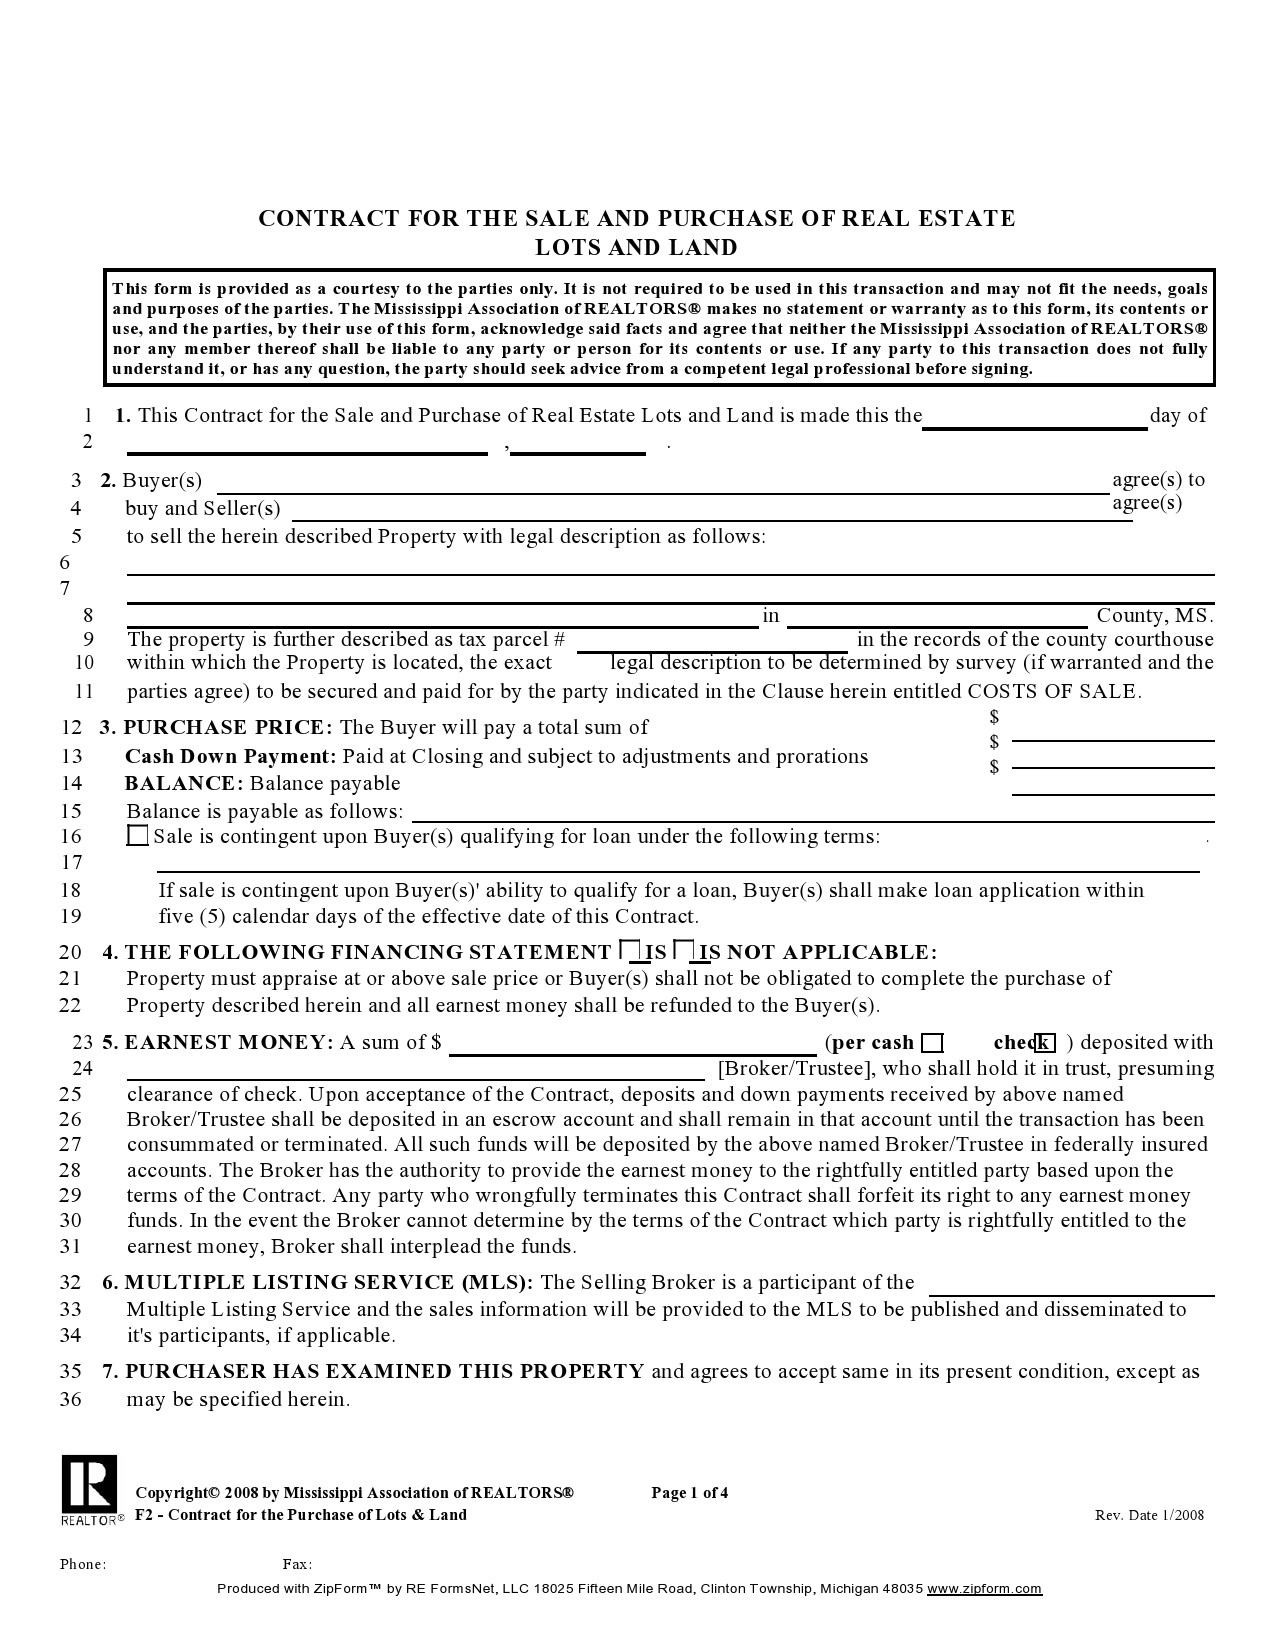 assignment of land contract wisconsin form